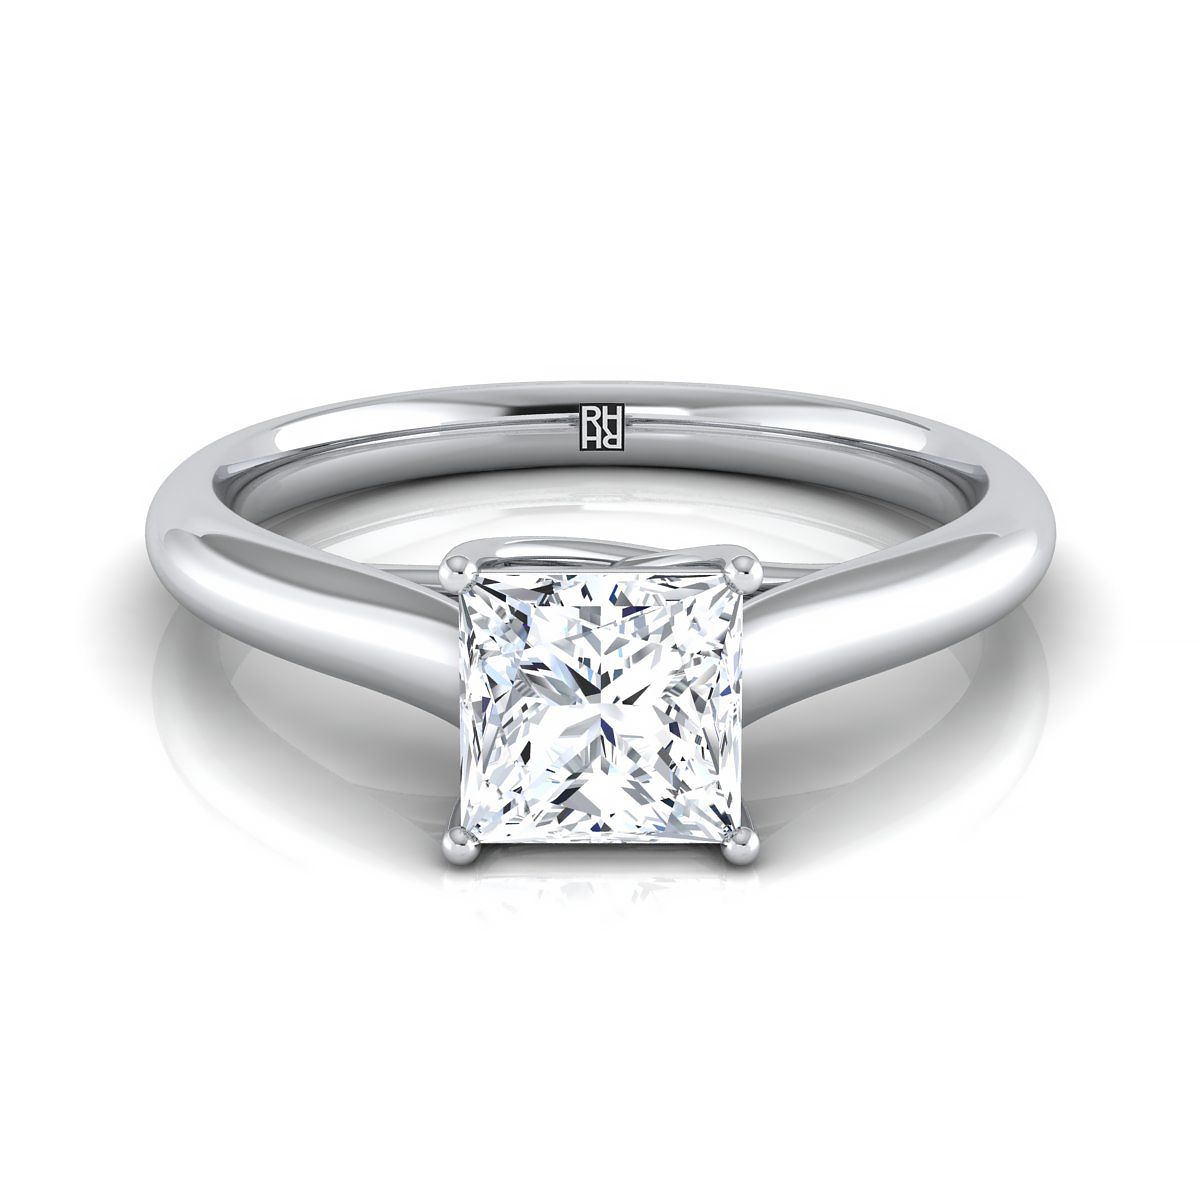 18K White Gold Princess Cut Rounded Classic Comfort Fit Solitaire Ring